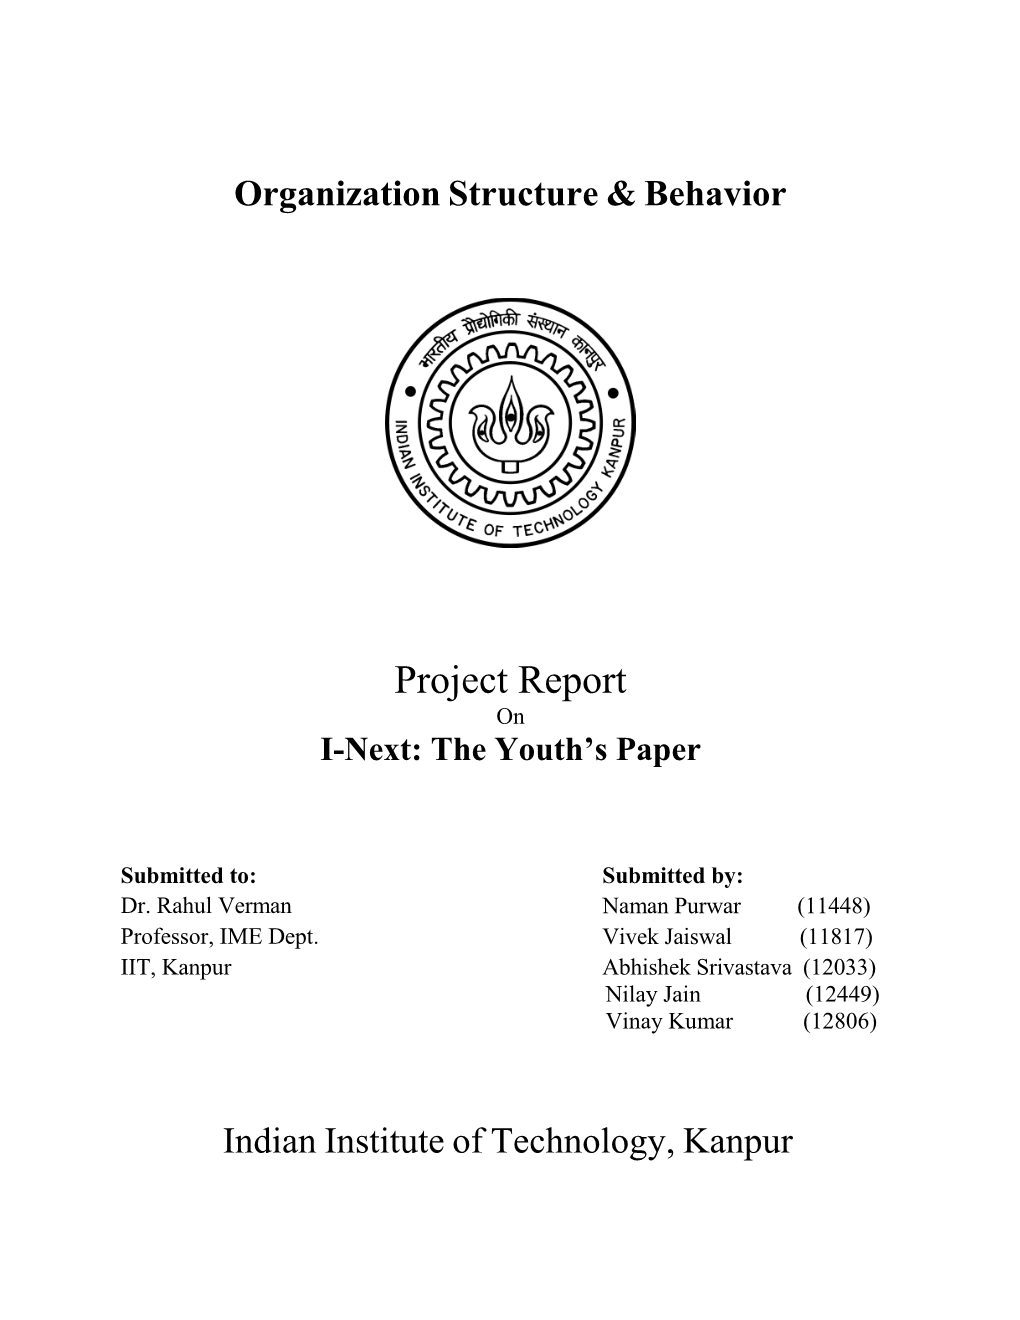 Project Report on I-Next: the Youth’S Paper